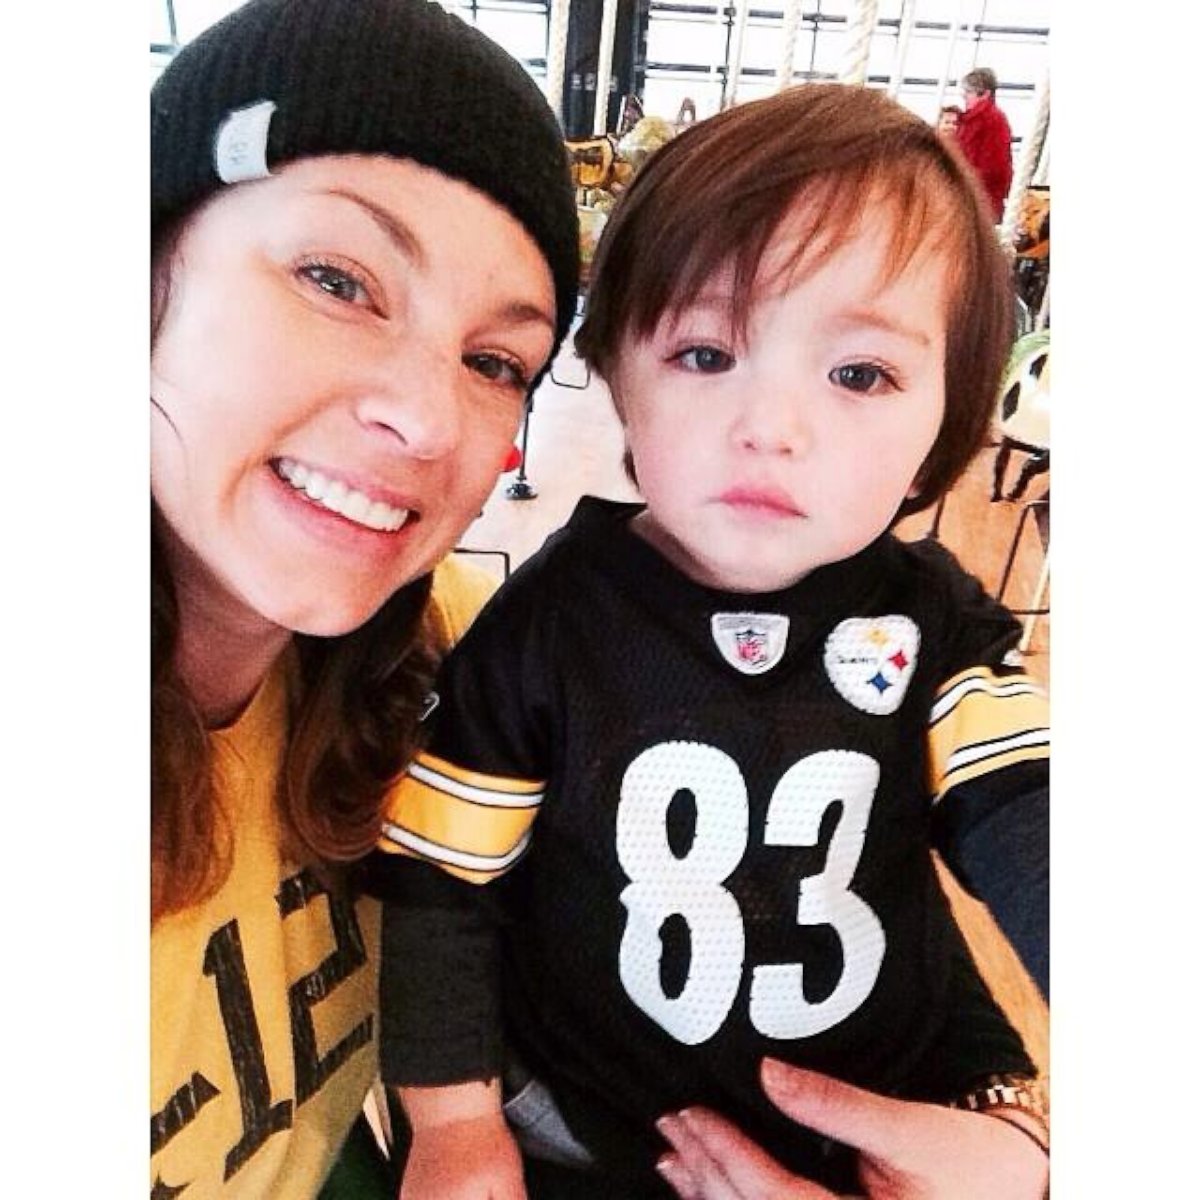 PHOTO: Stephanie Barnhart, 34, started a petition advocating for better accommodations for nursing mothers at Heinz Field in Pittsburgh, Penn.